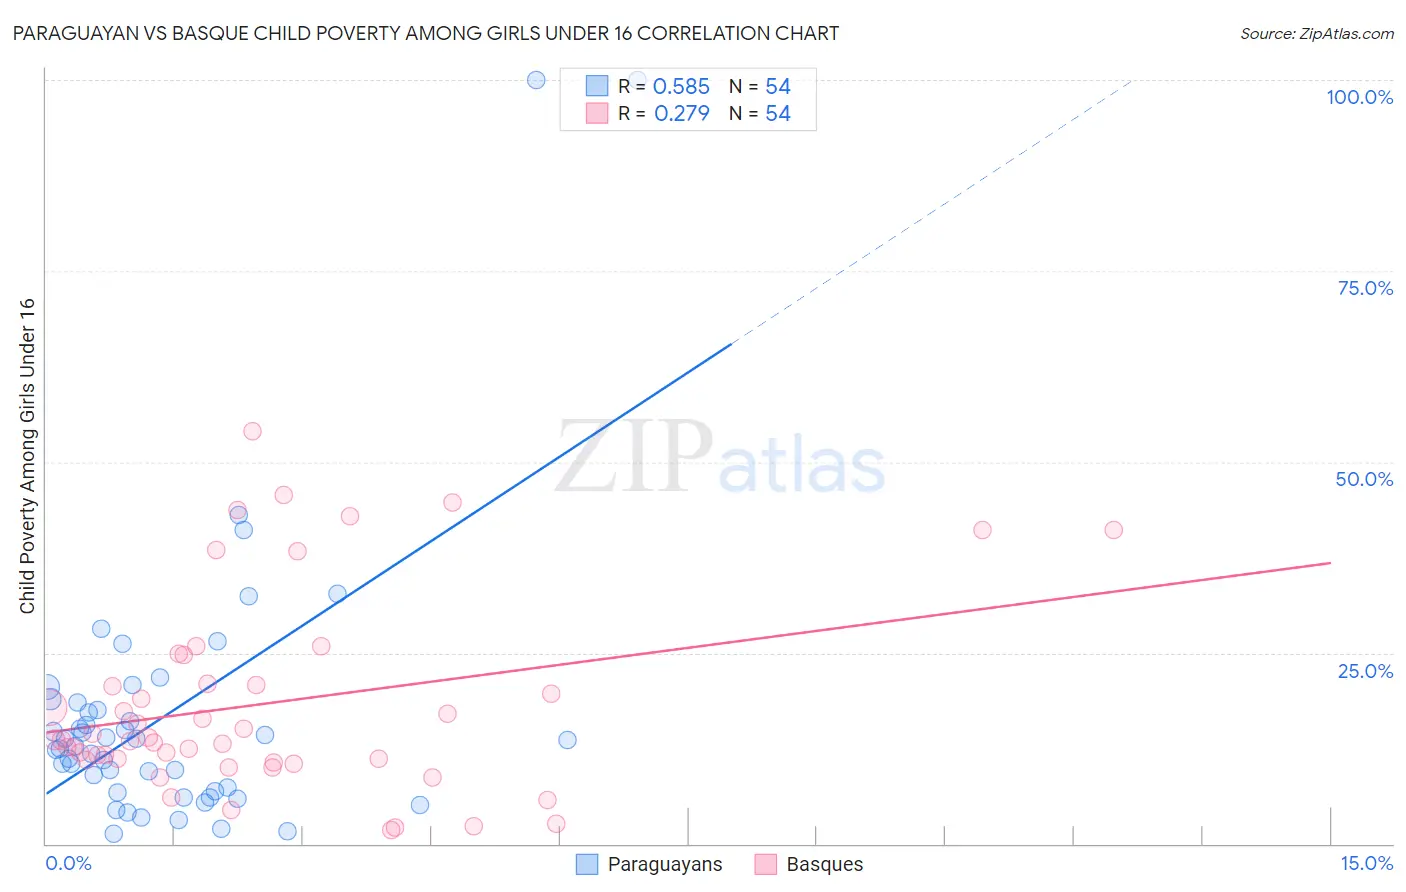 Paraguayan vs Basque Child Poverty Among Girls Under 16